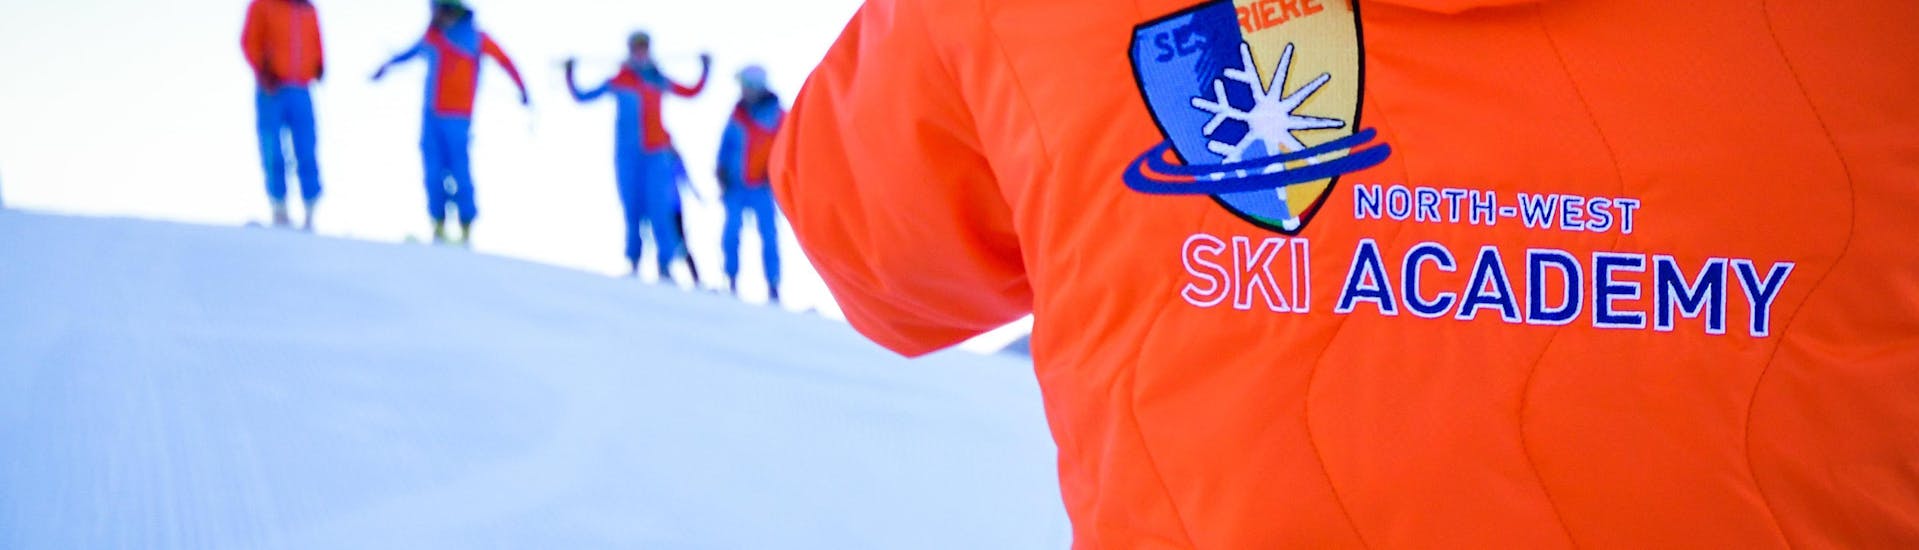 kids-ski-lessons-3-6-y-small-group-beginners-yes-academy-sestriere